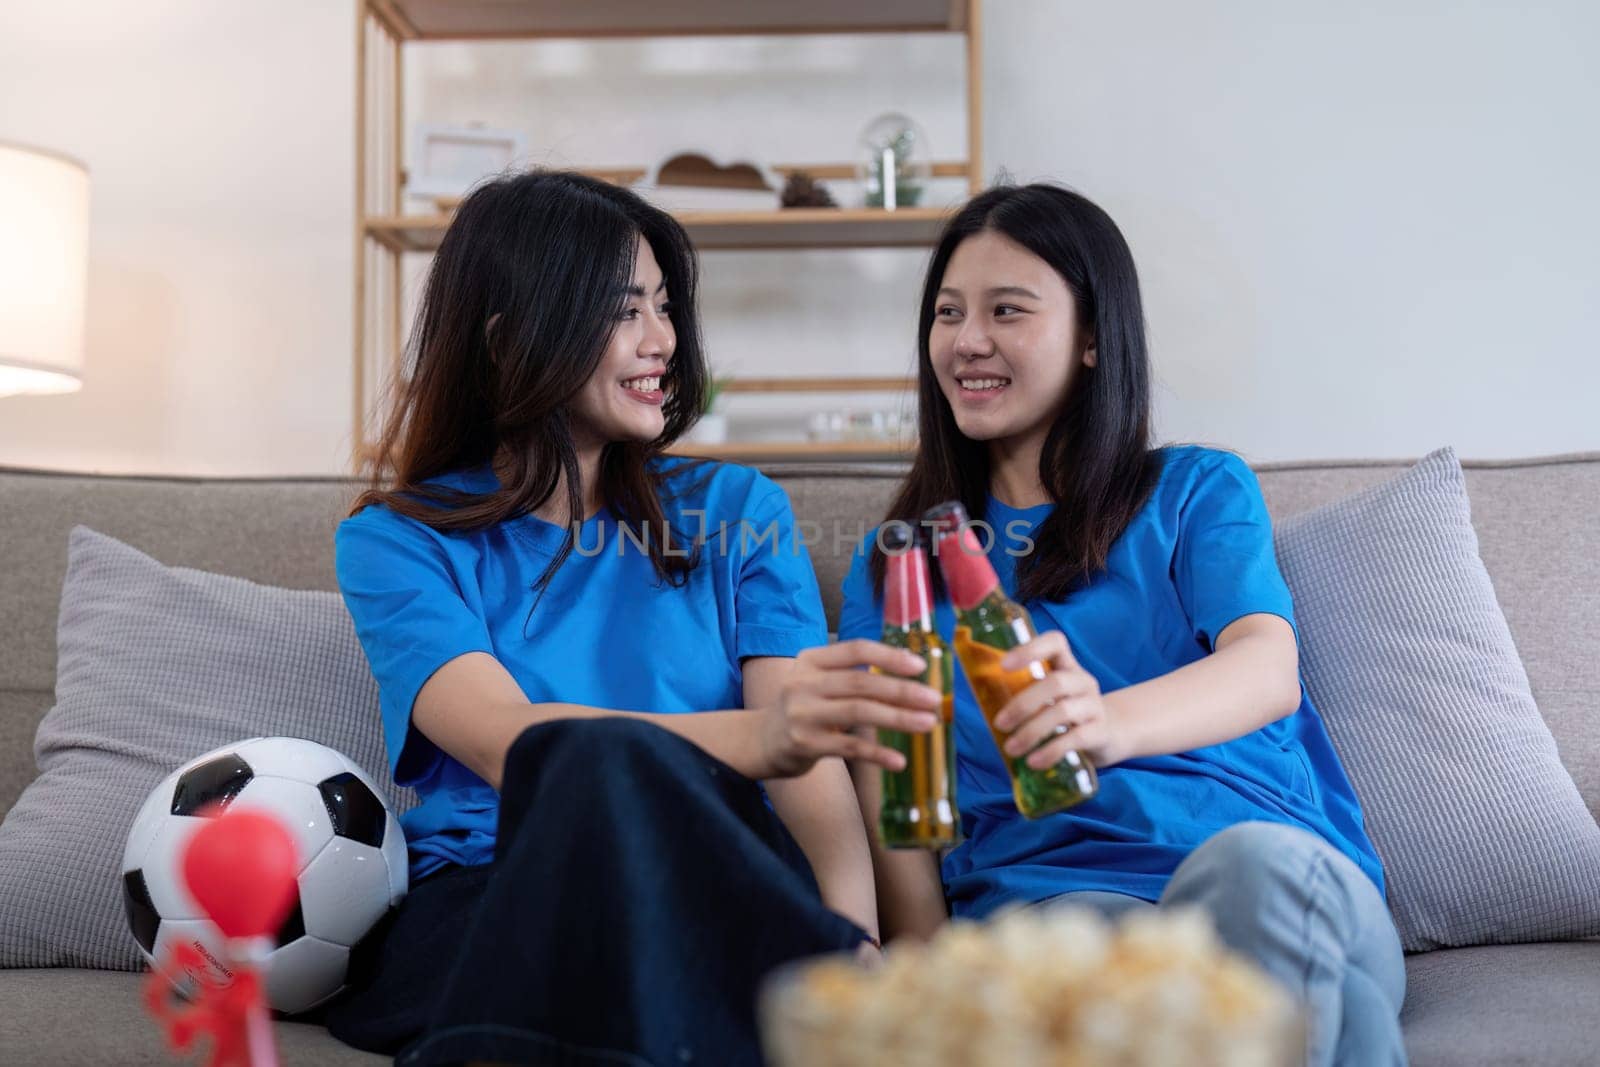 Lesbian couple cheering for Euro football with beers at home. Concept of LGBTQ+ pride, celebration, and sports enthusiasm by nateemee